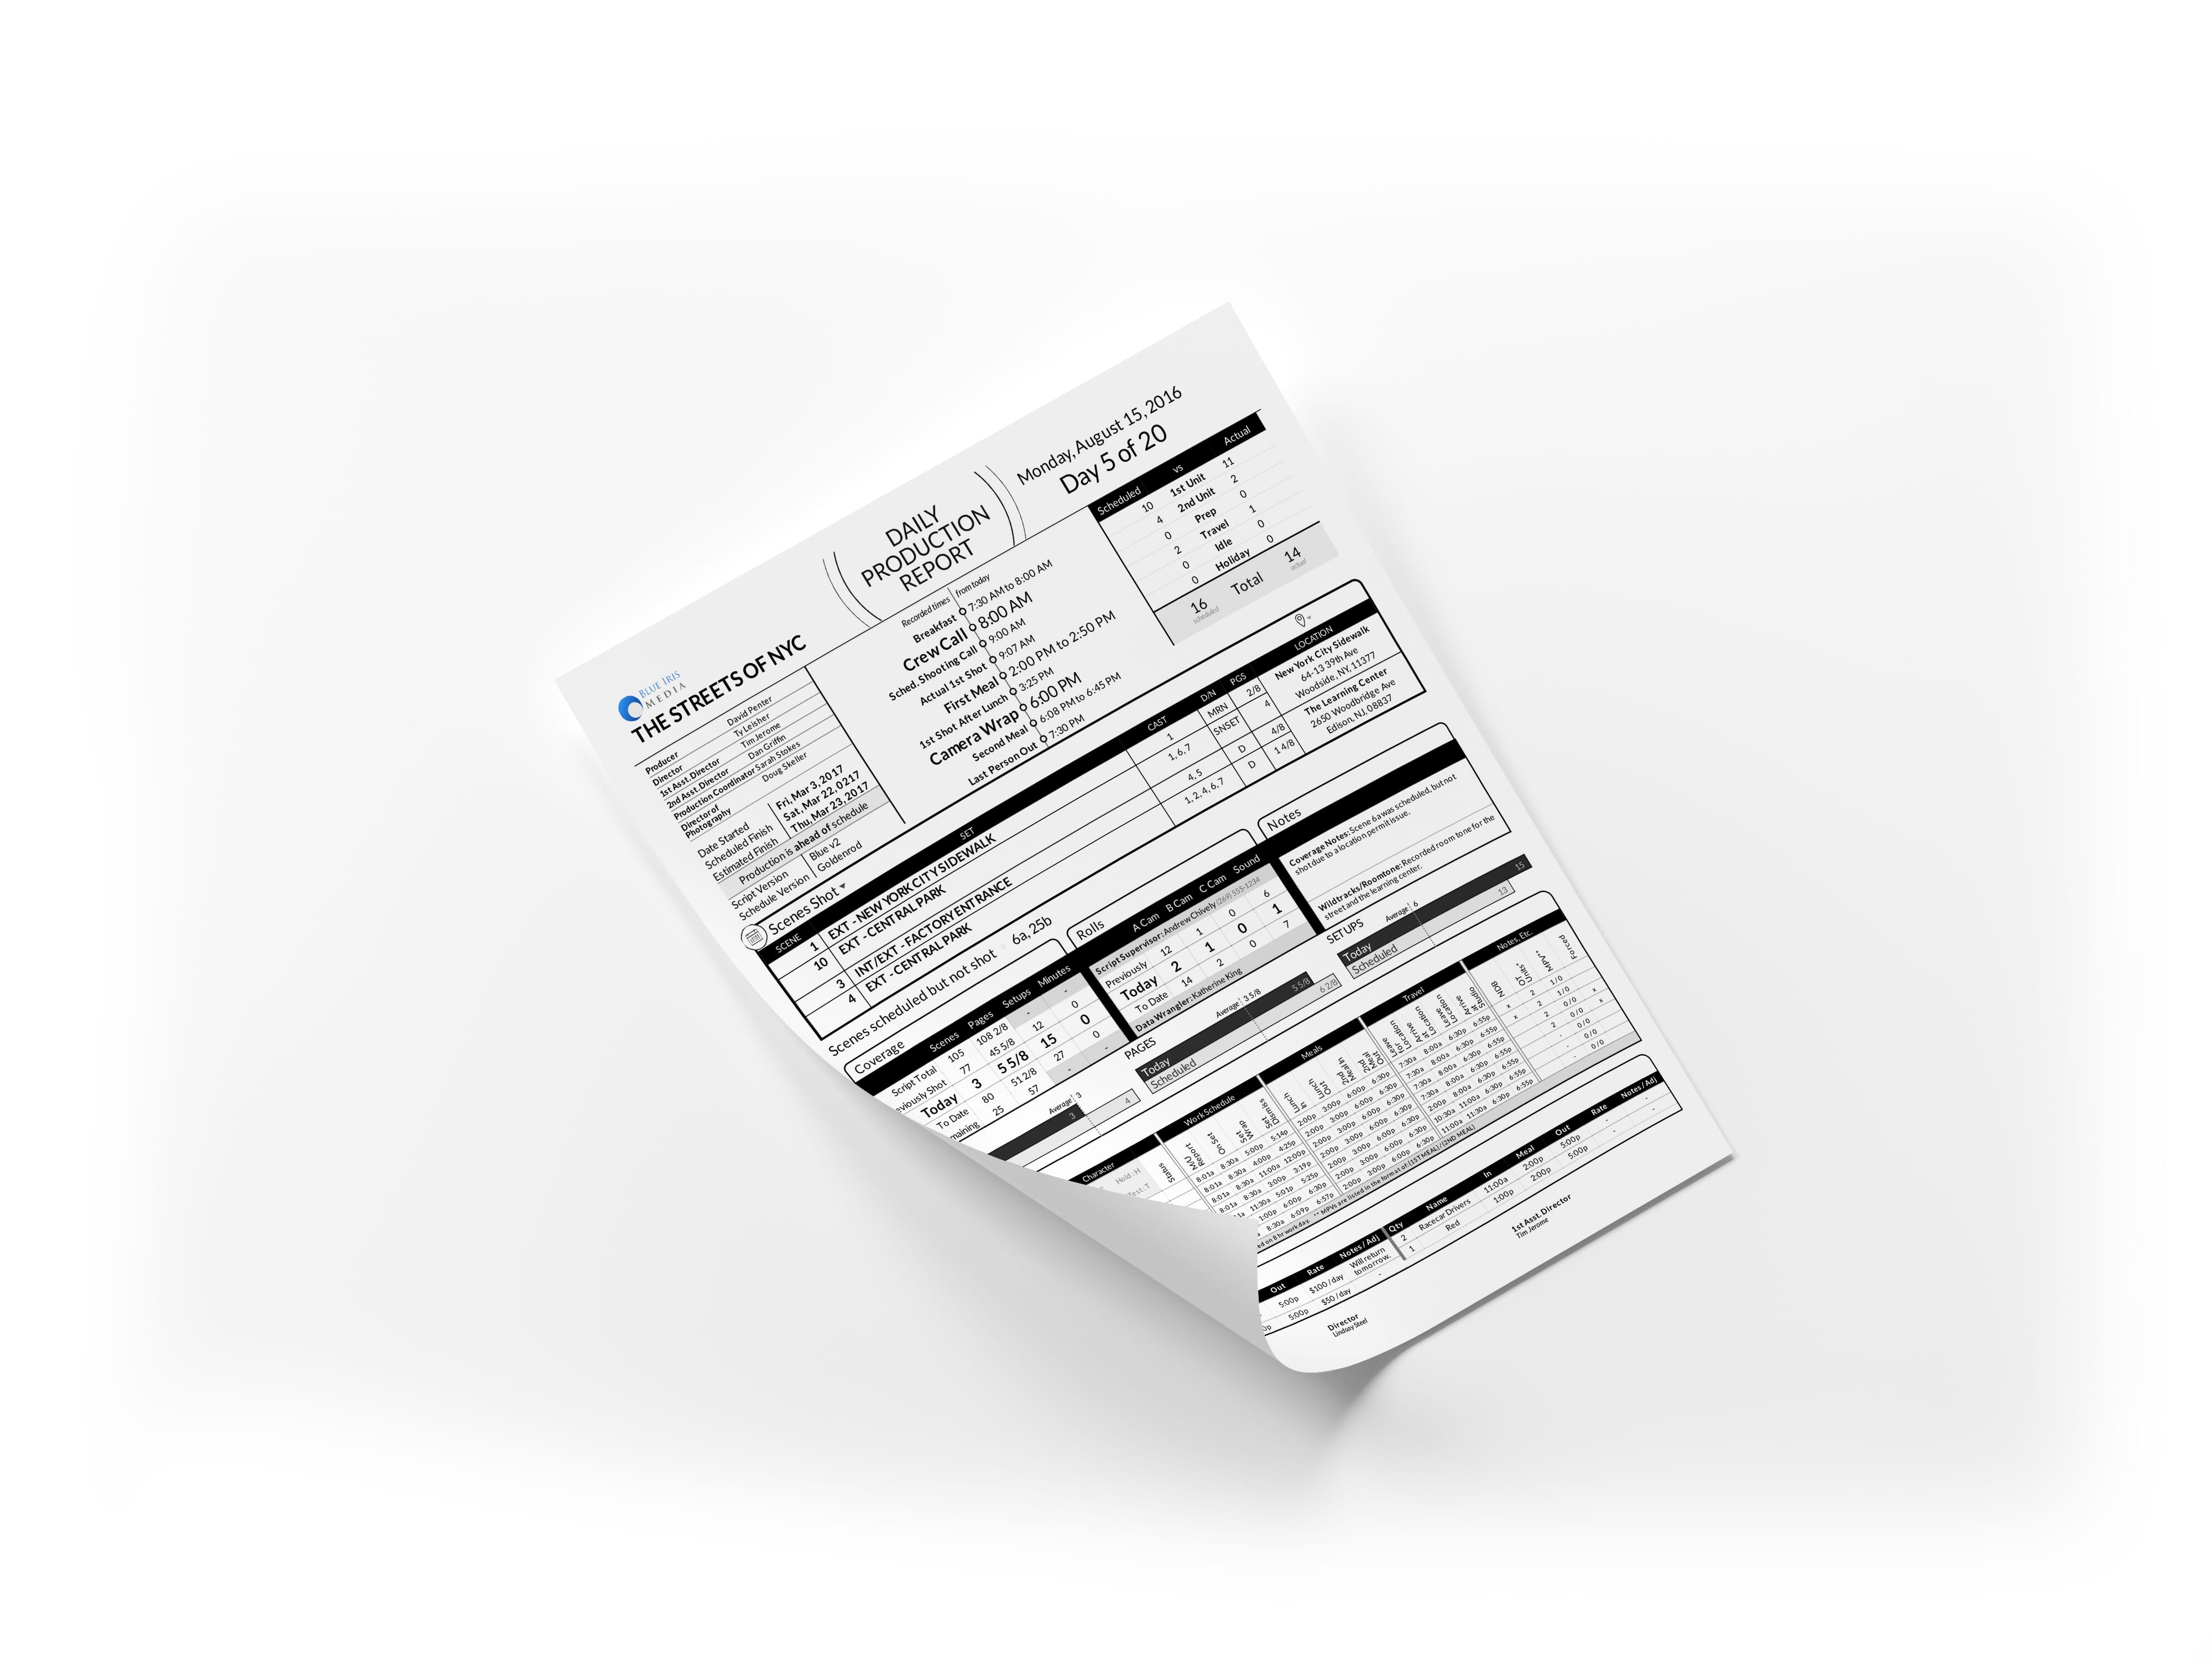 Download Folded A4 Paper Mockup by Anthony Boyd Graphics | SetHero